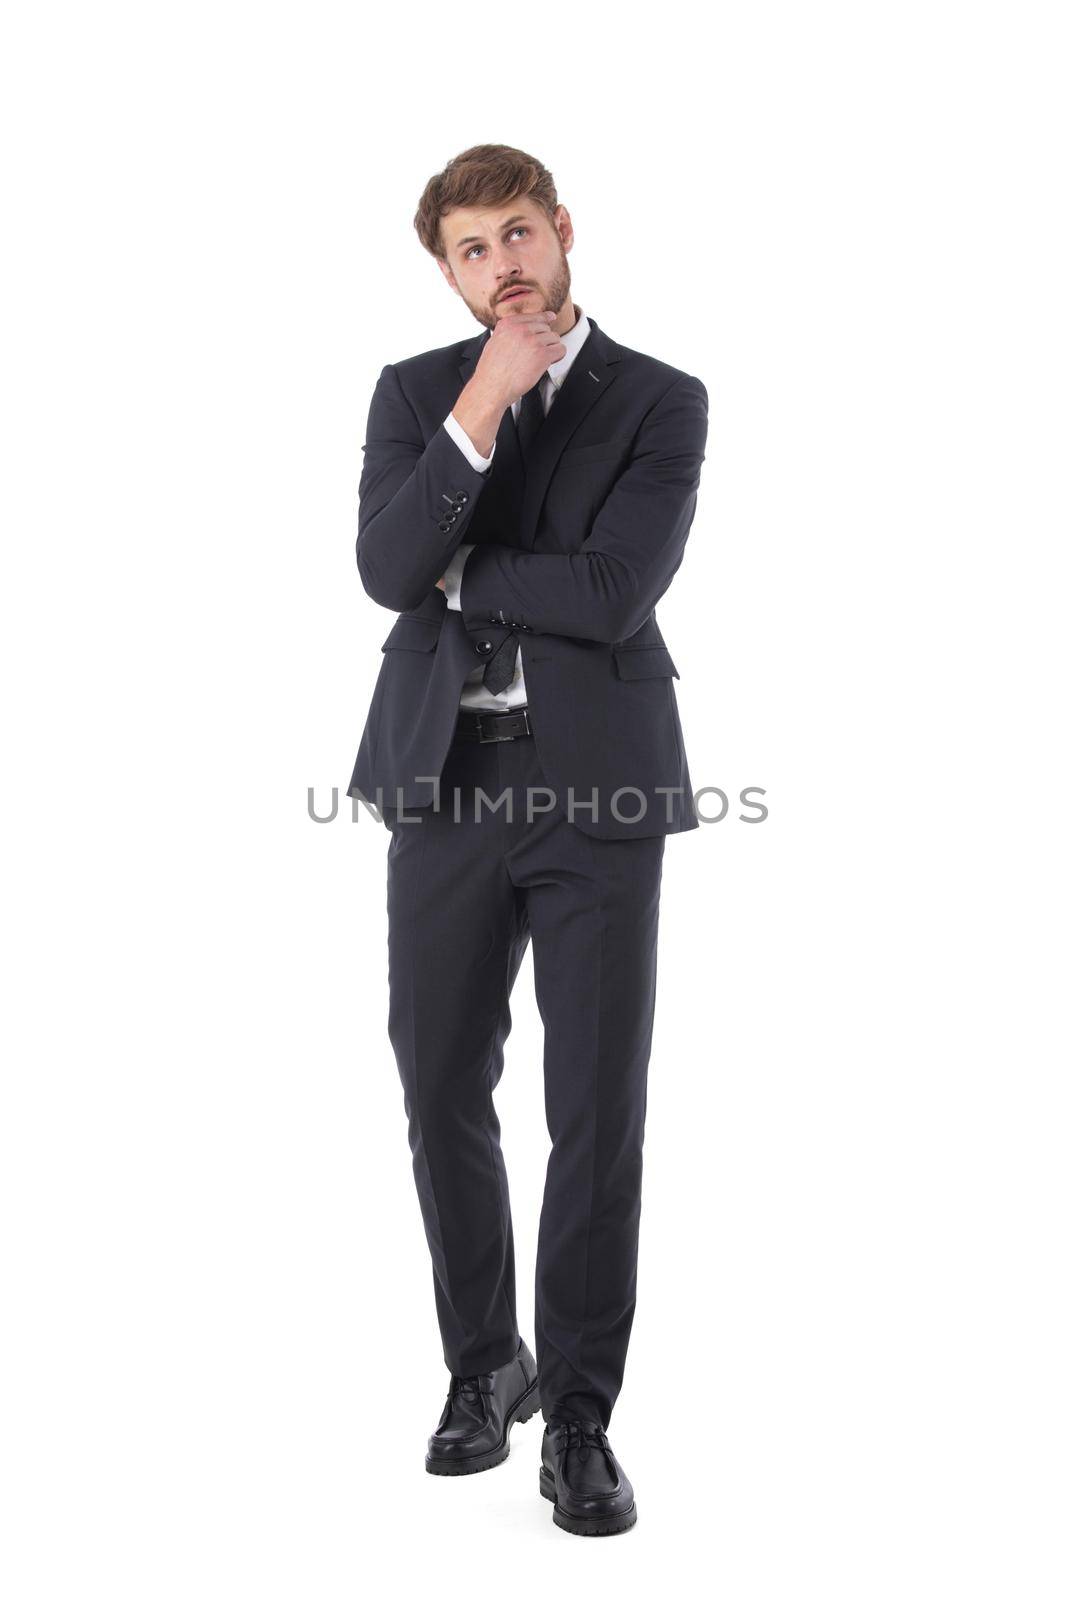 Thoughtful business man holding his hand under his chin full length studio portrait isolated on white background